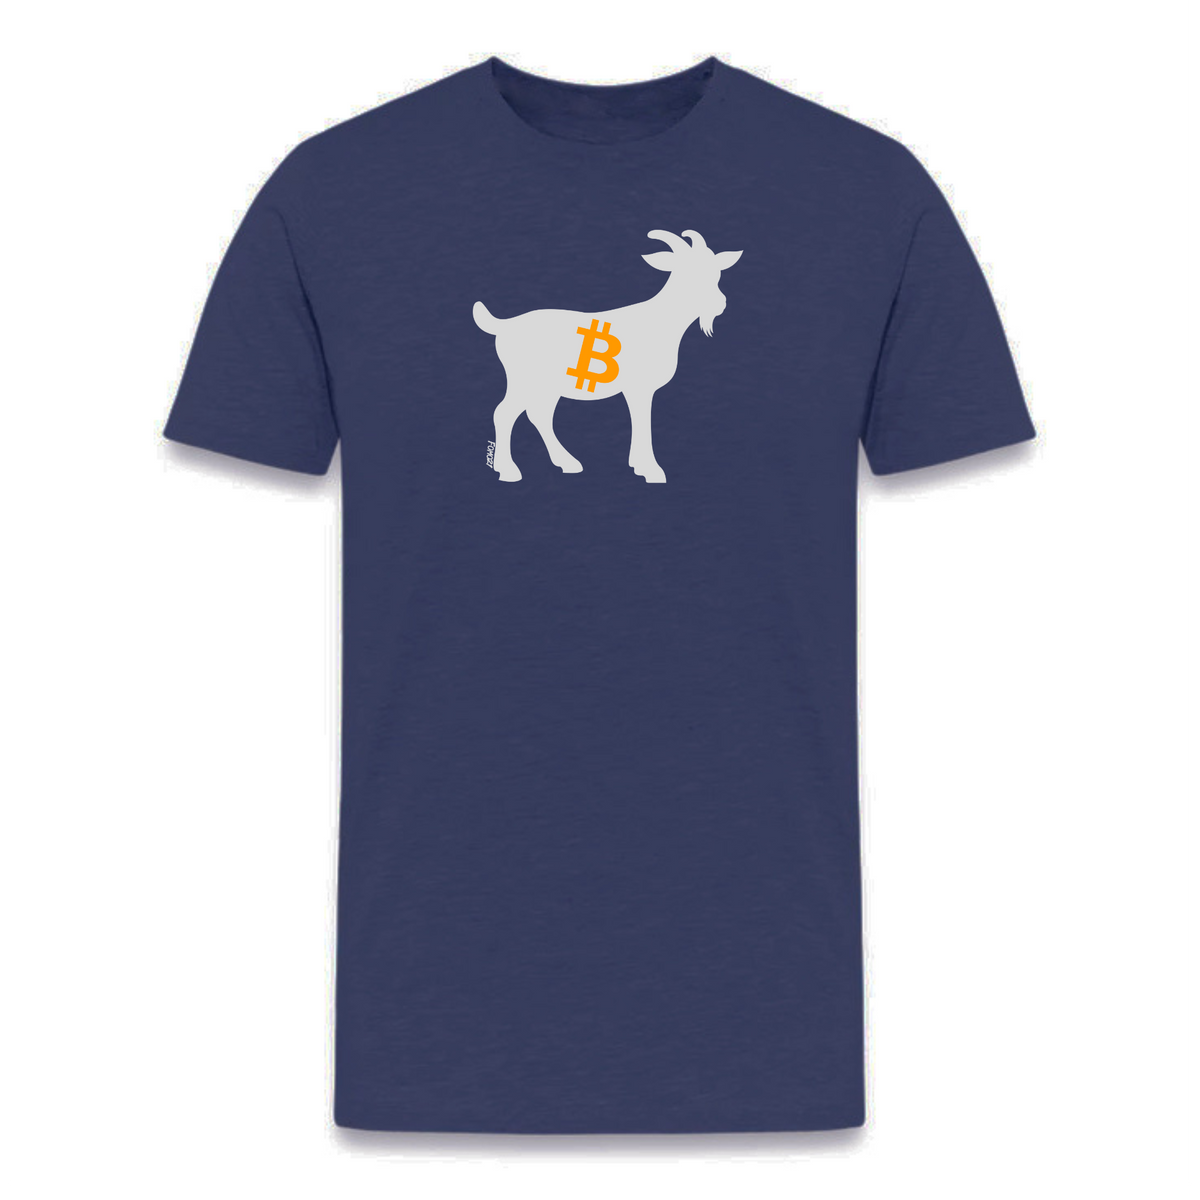 Bitcoin Is The Goat T-Shirt - fomo21